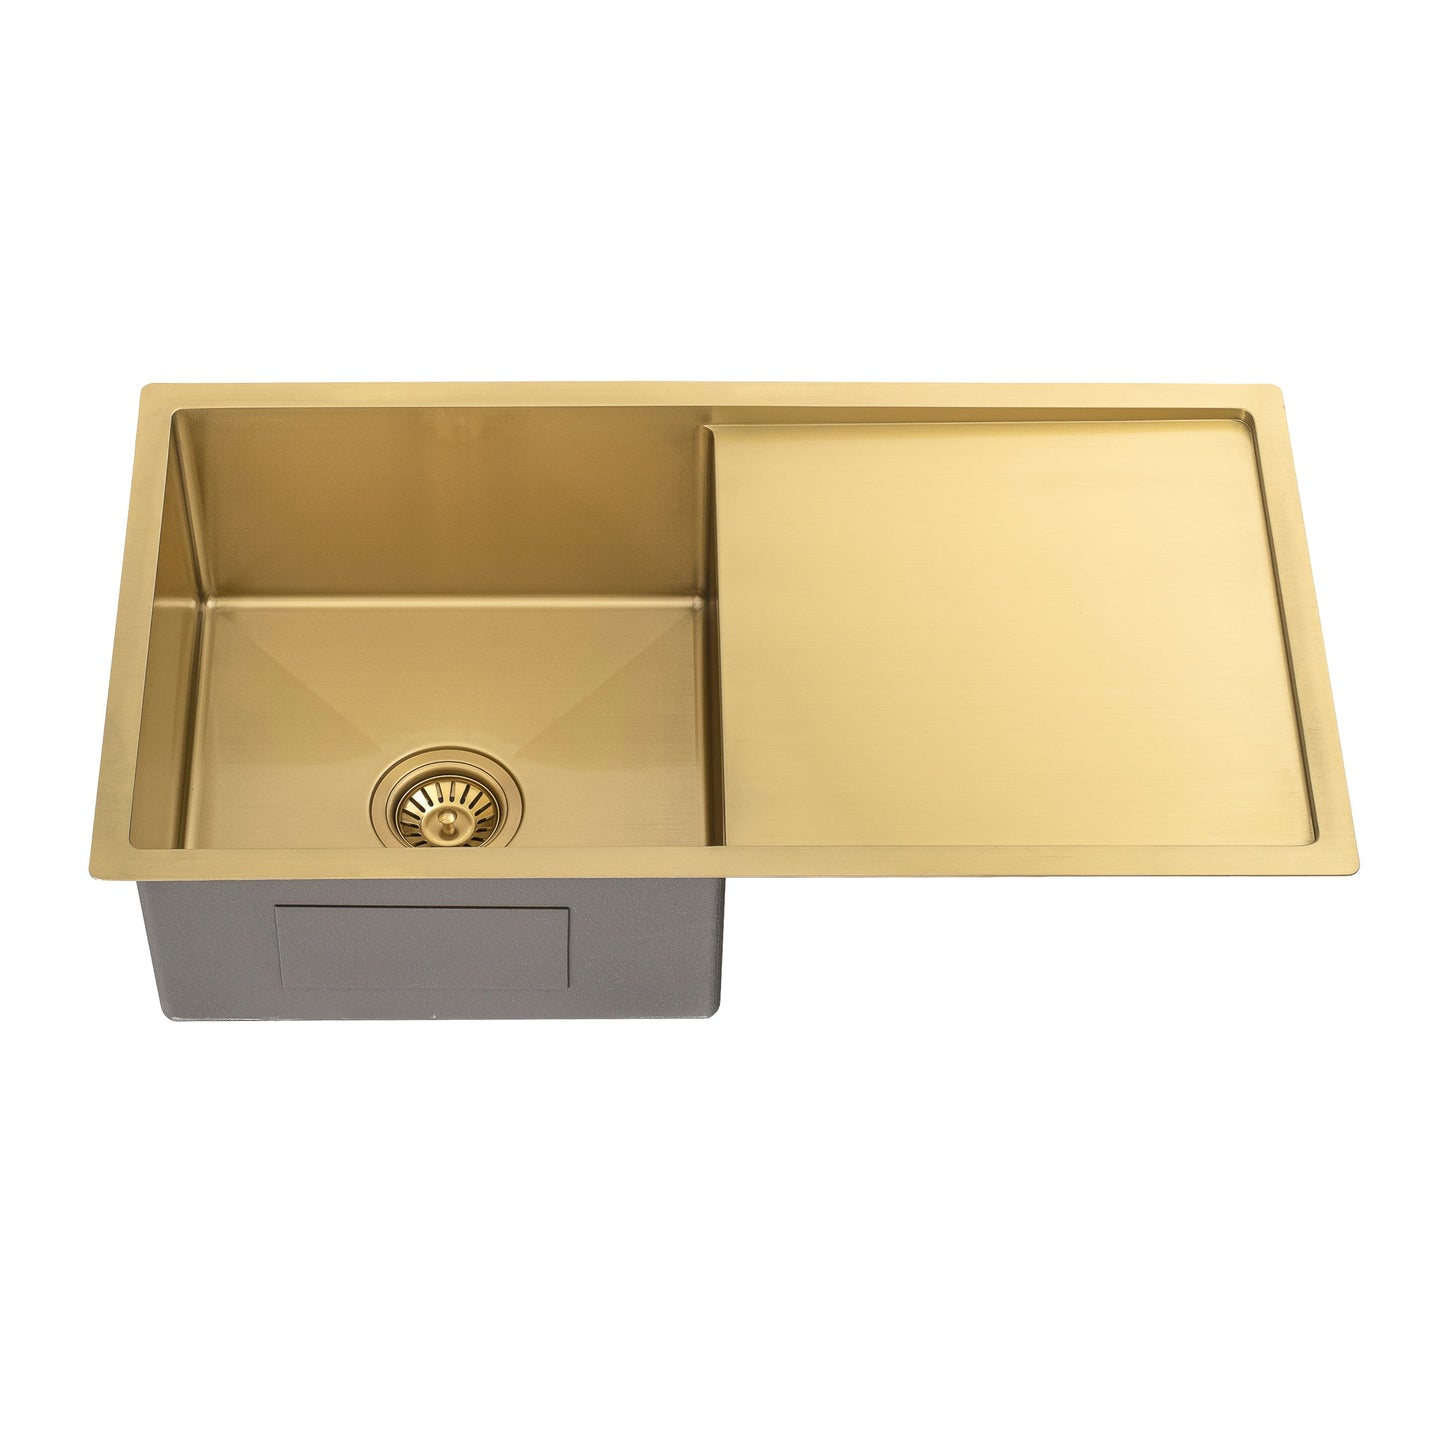 Retto II 850mm x 450mm x 230mm Stainless Steel Sink with Drainer, Brushed Brass Gold